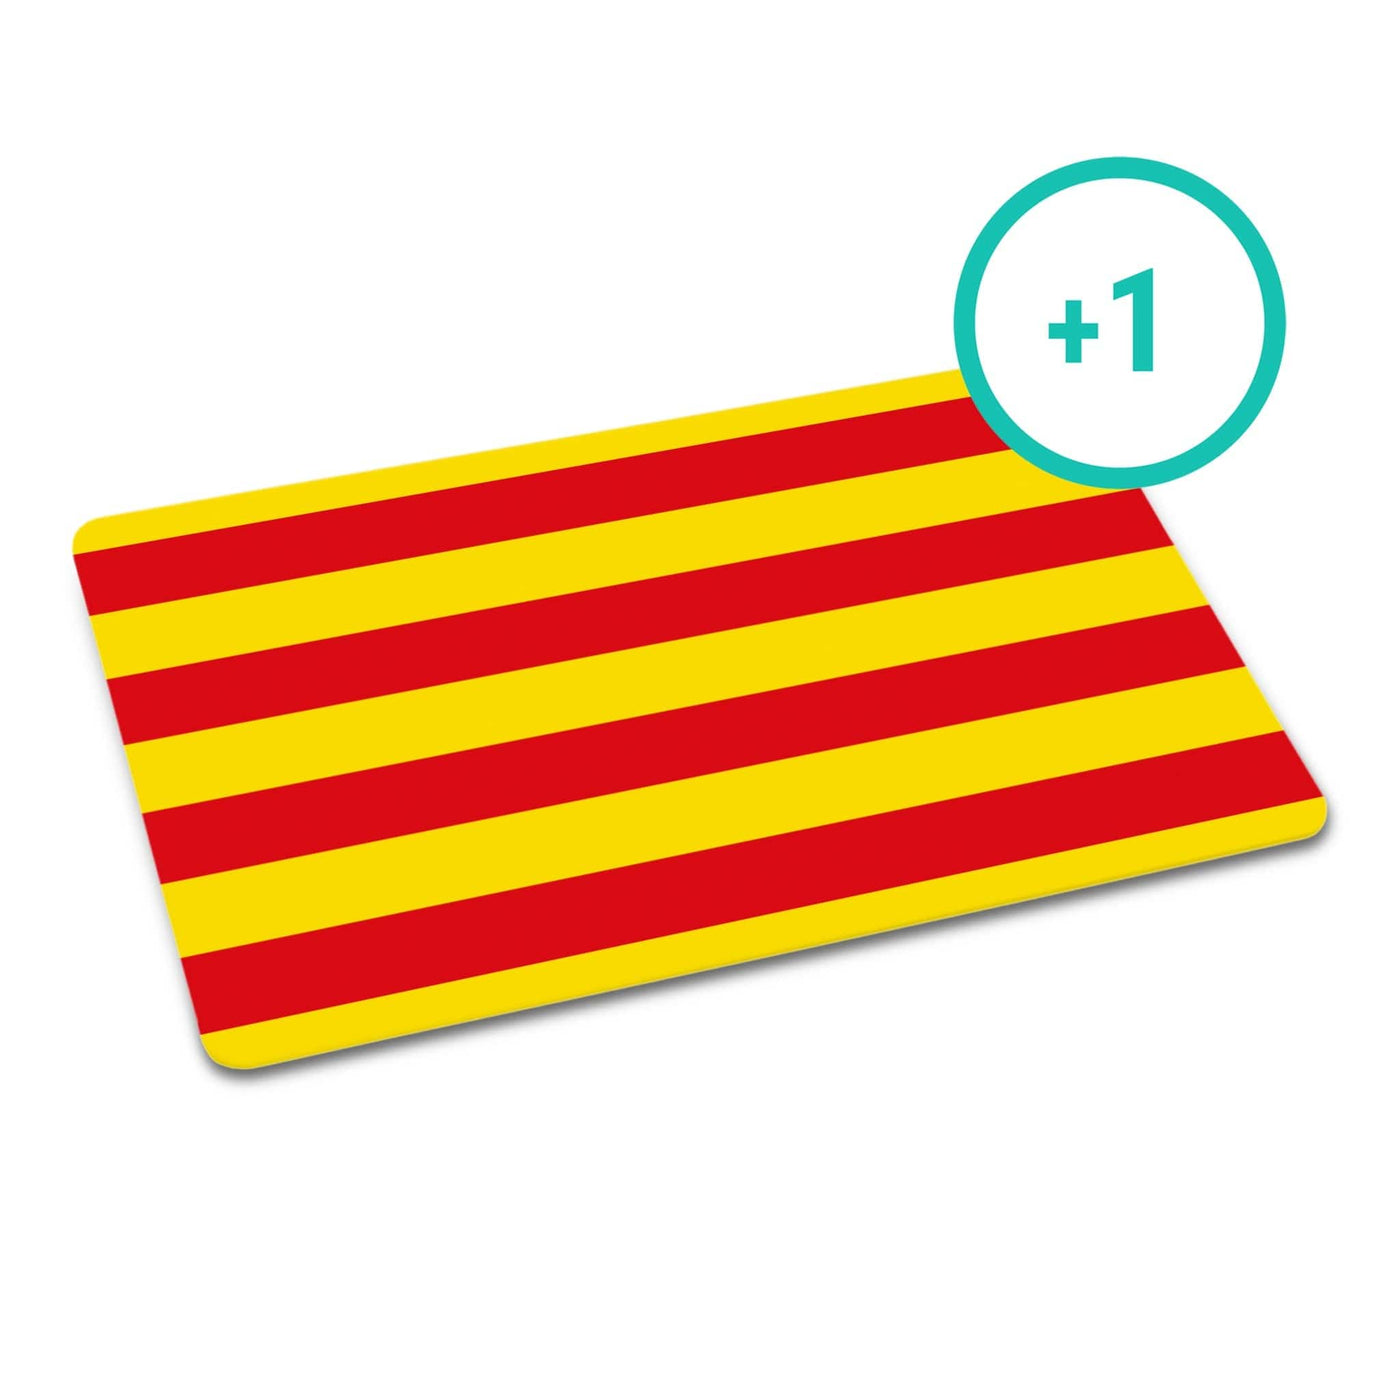 Additional Customized Card: Catalan (Leave in cart to purchase)